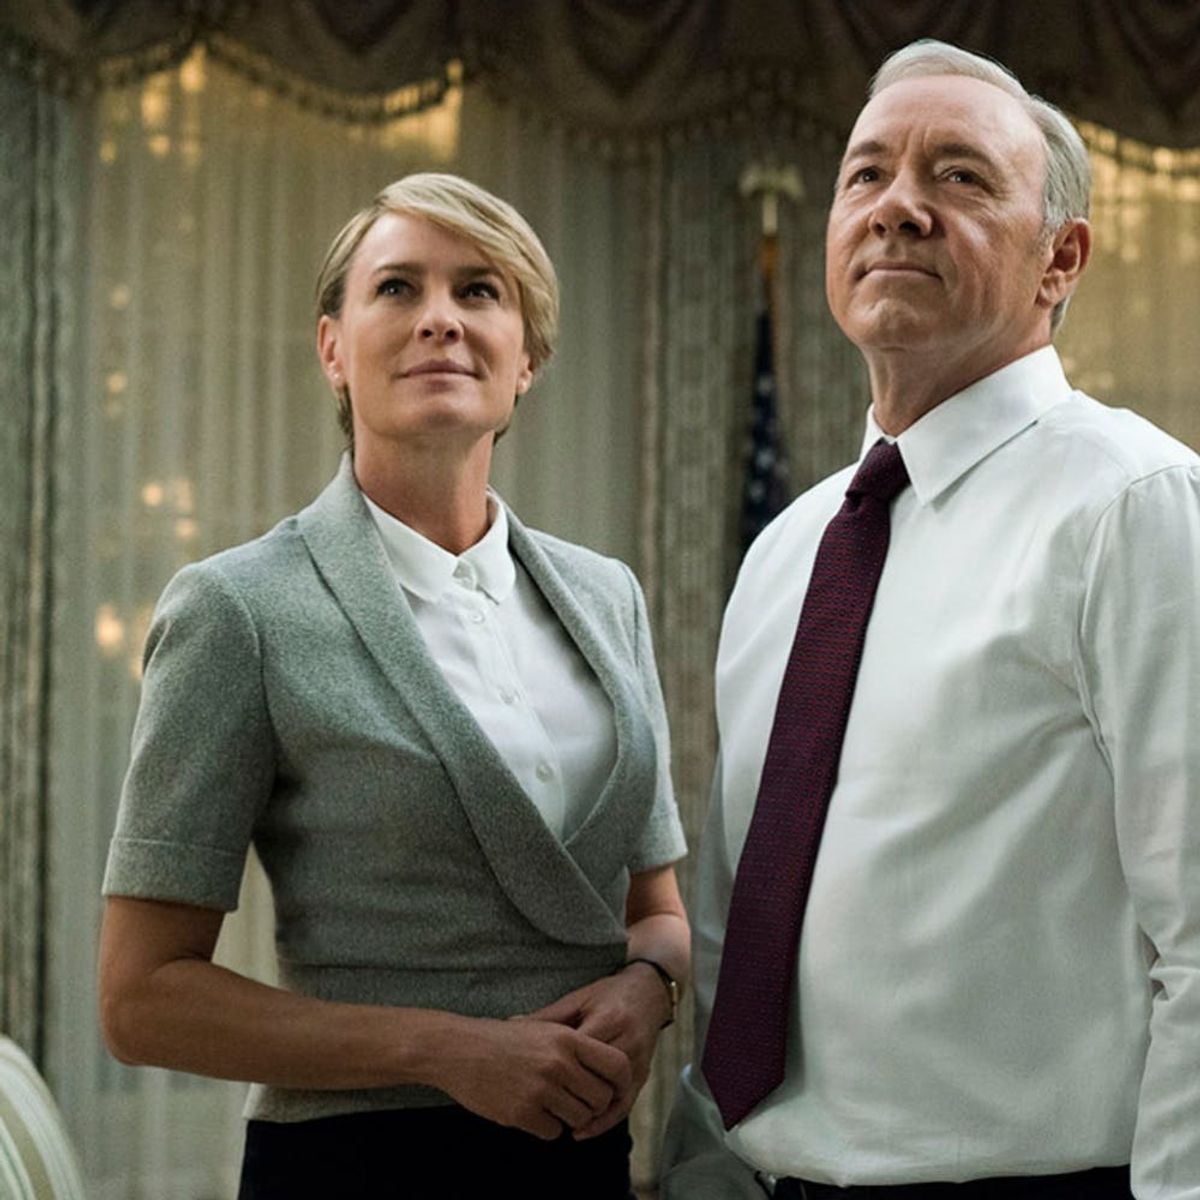 “House of Cards” Spin-offs Might Be Headed to Netflix After the Kevin Spacey Scandal